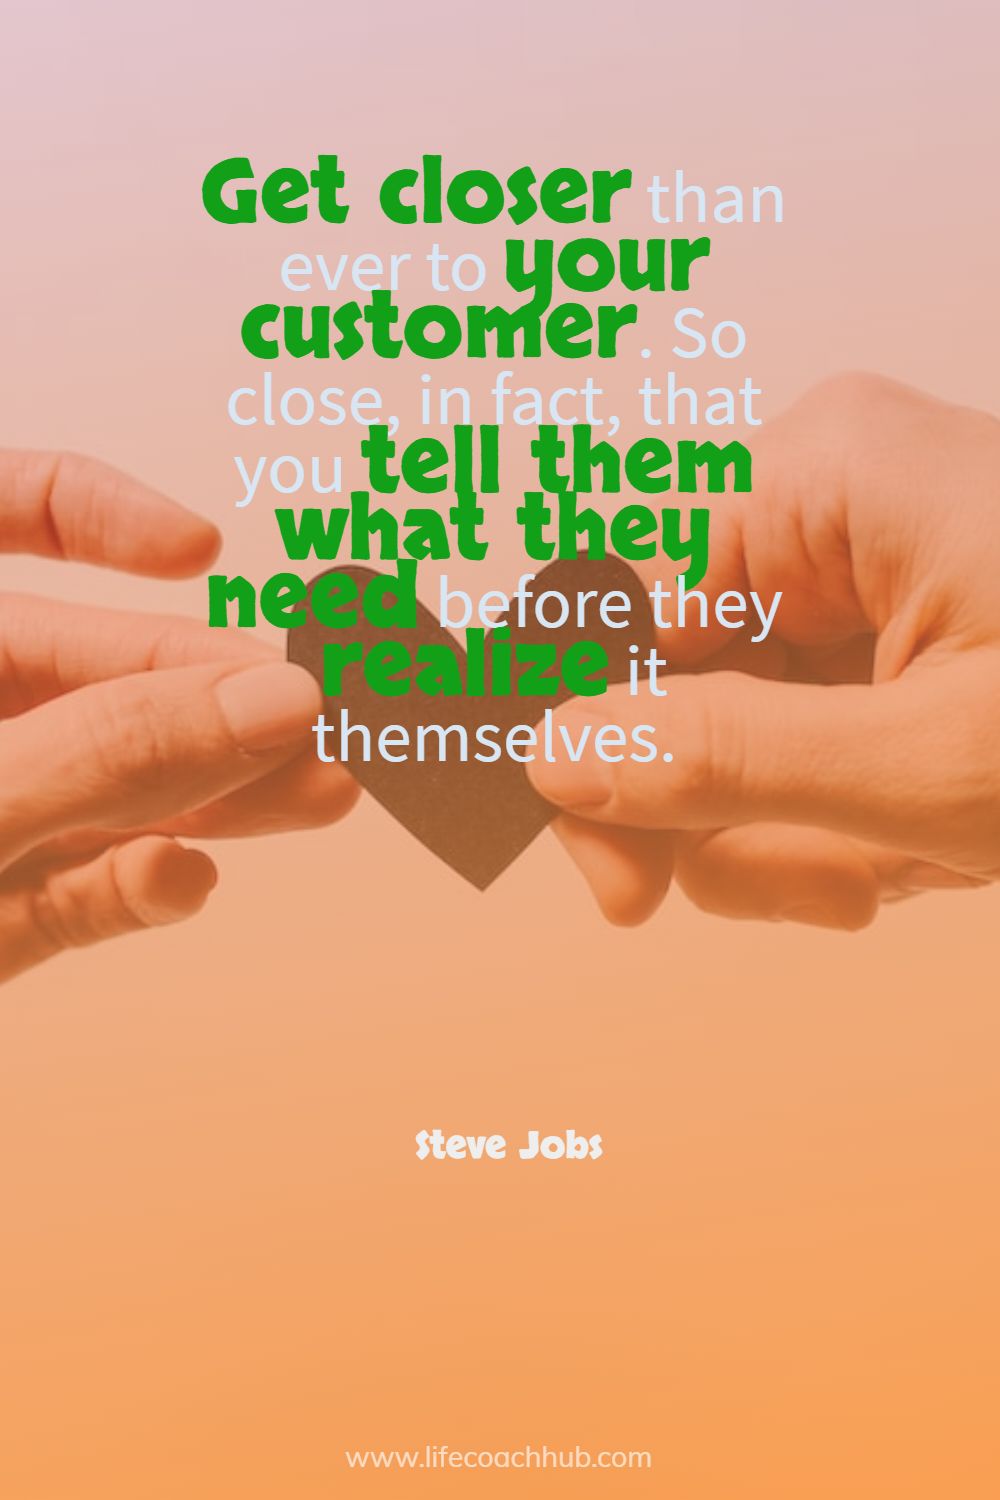 Get closer than ever to your customer. So close, in fact, that you tell them what they need before they realize it themselves. Steve Jobs Coaching Quote